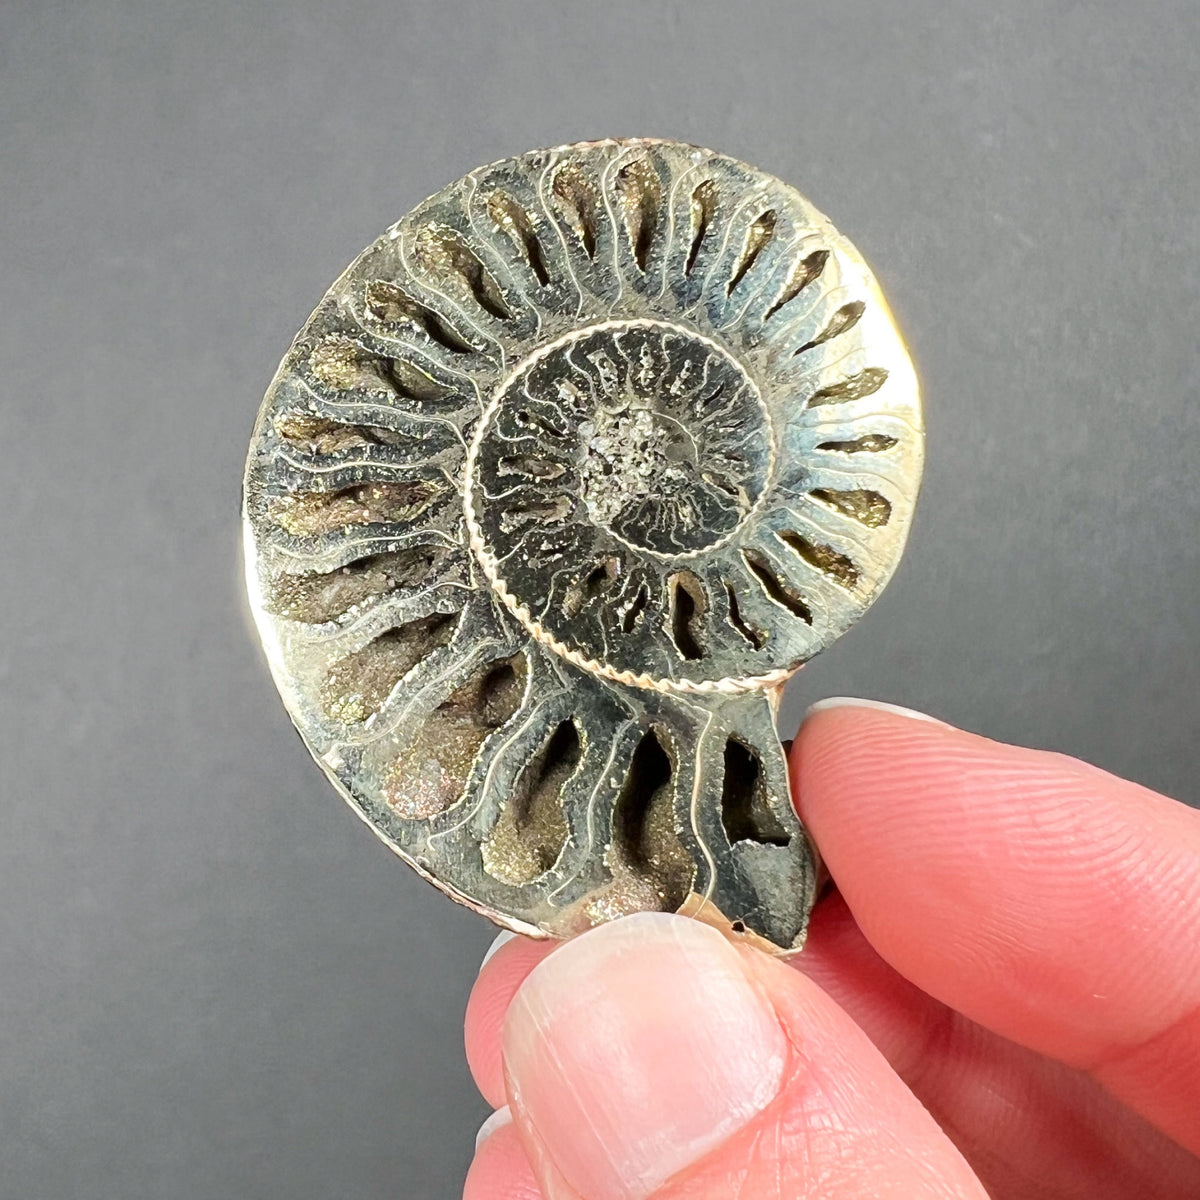 Ammonite Shell Fossil Preserved by Pyrite